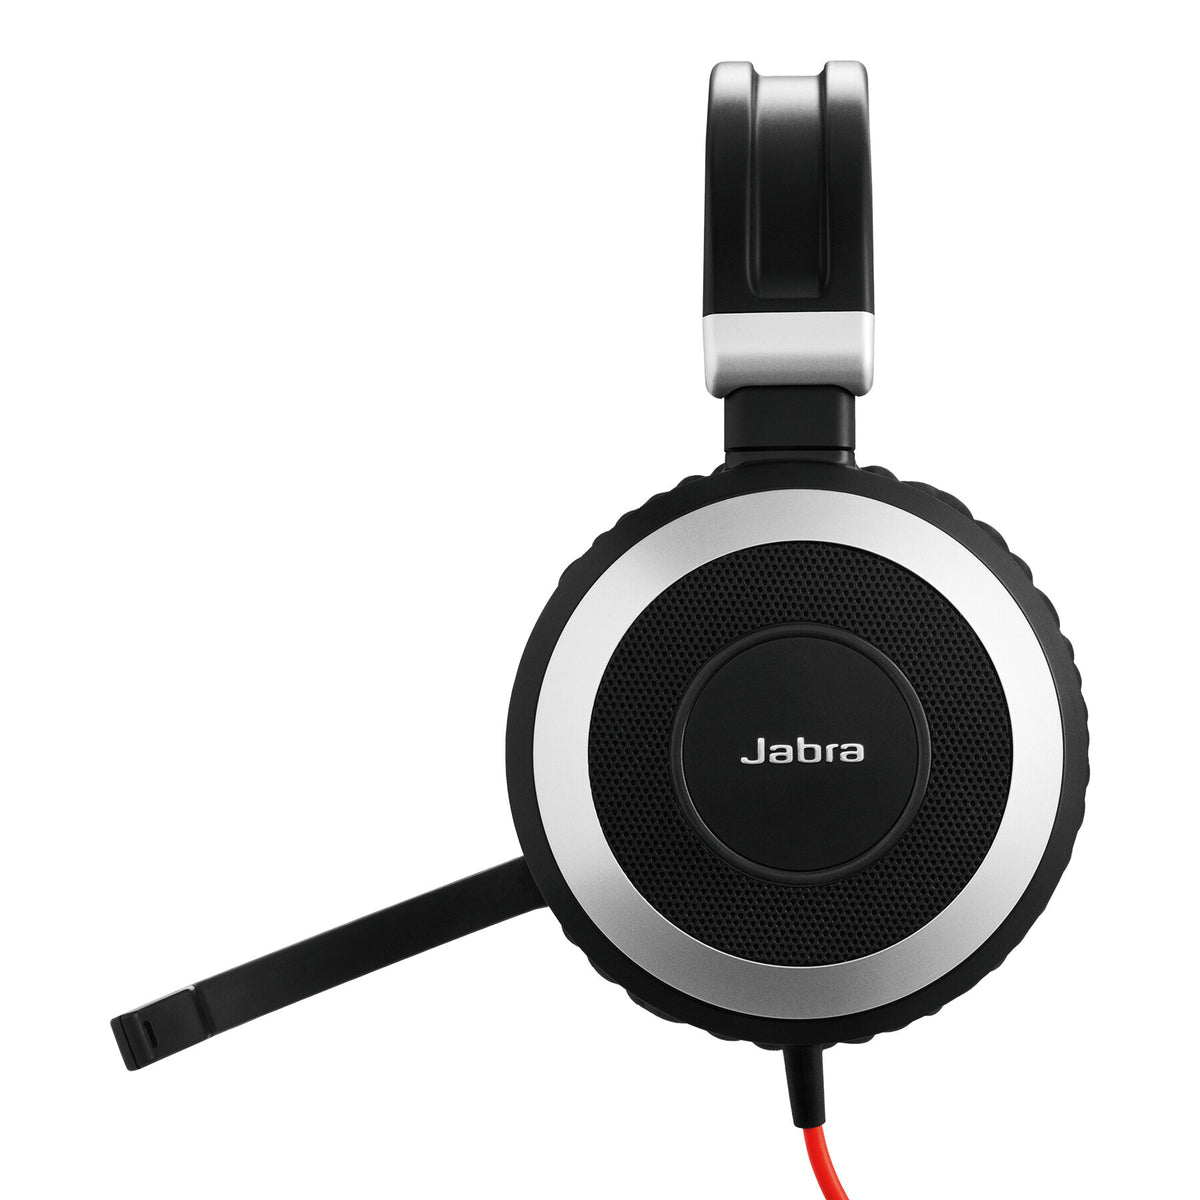 Jabra Evolve 80 MS - USB-C Stereo Wired Headset for Business